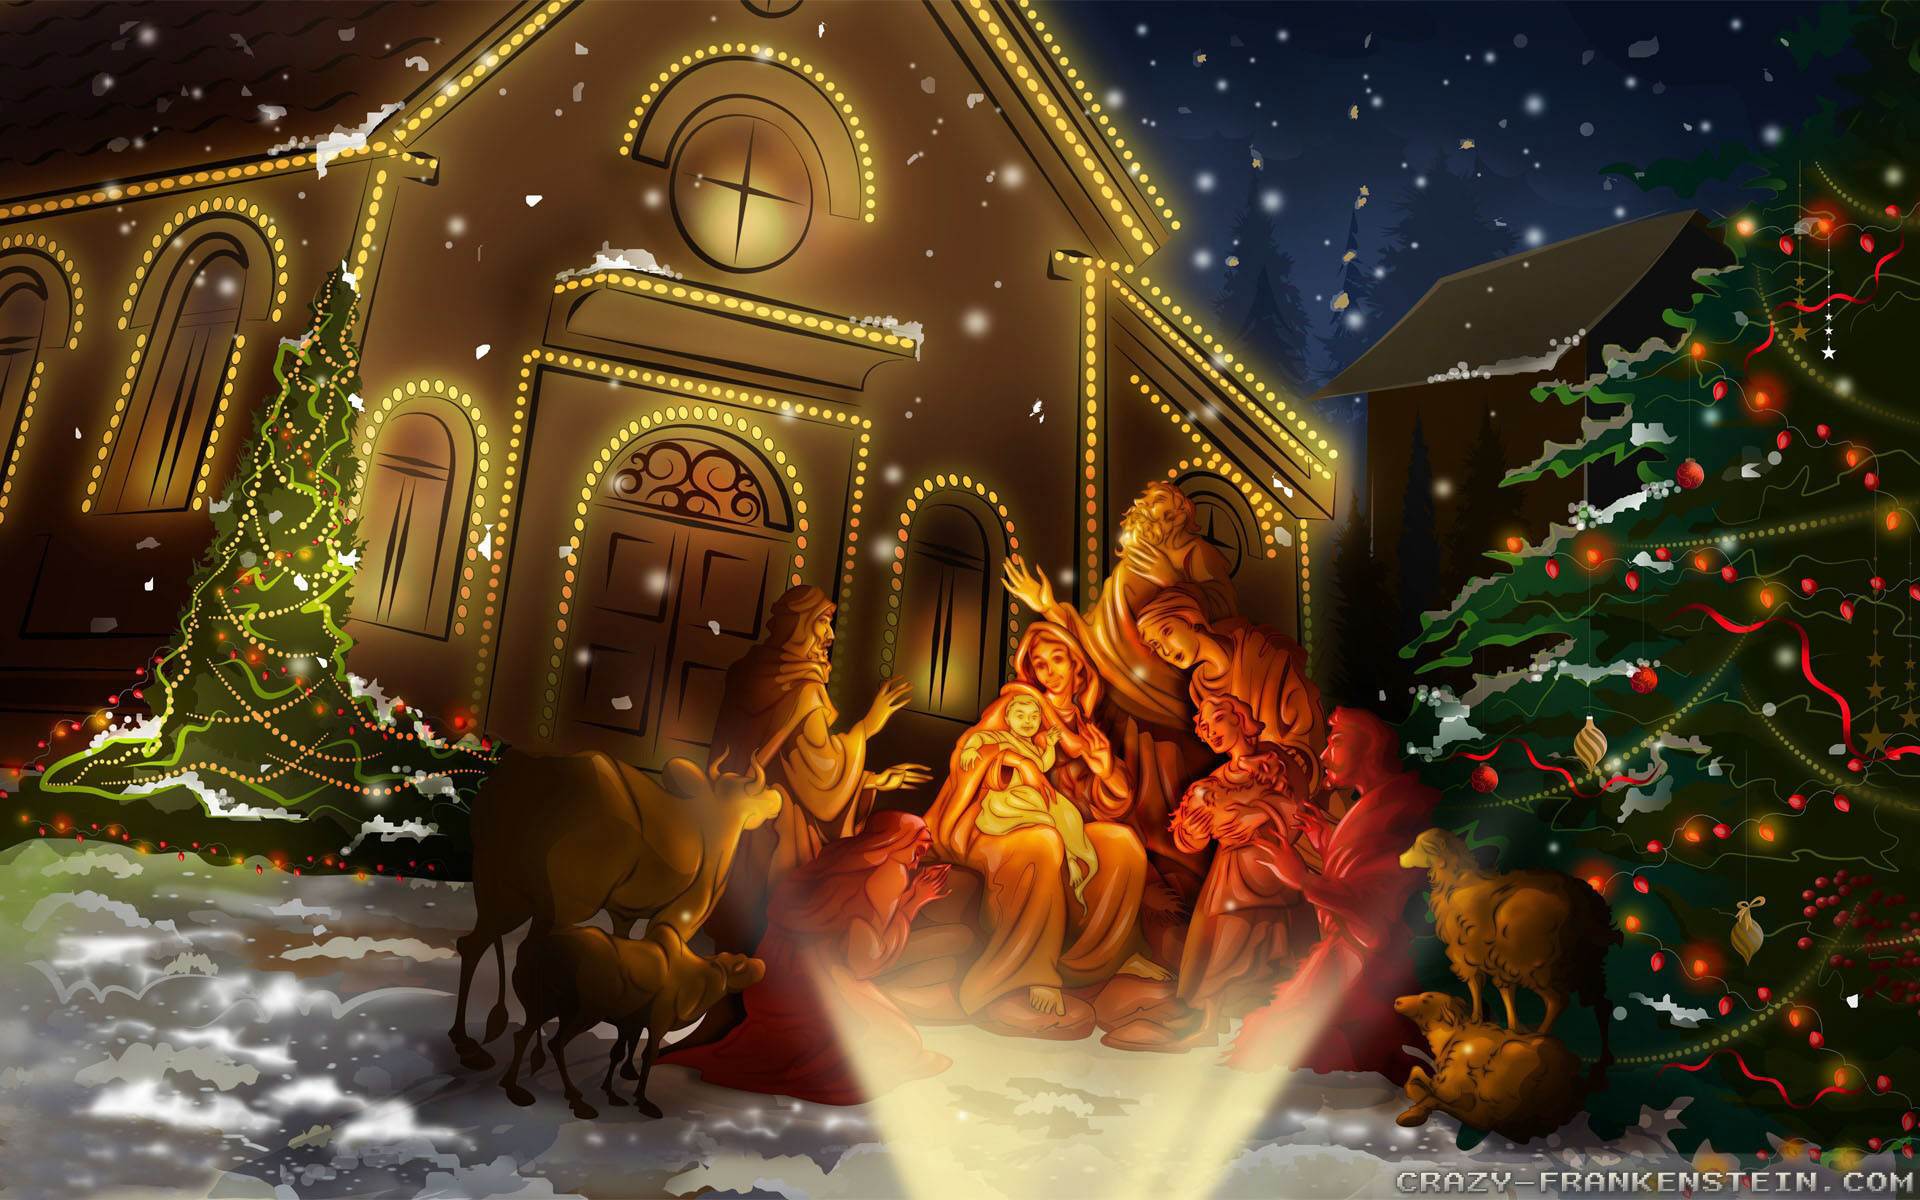 1920x1200 Wallpaper: Traditional Christmas eve wallpapers. Resolution: 1024x768 |  1280x1024 | 1600x1200. Widescreen Res: 1440x900 | 1680x1050 | 